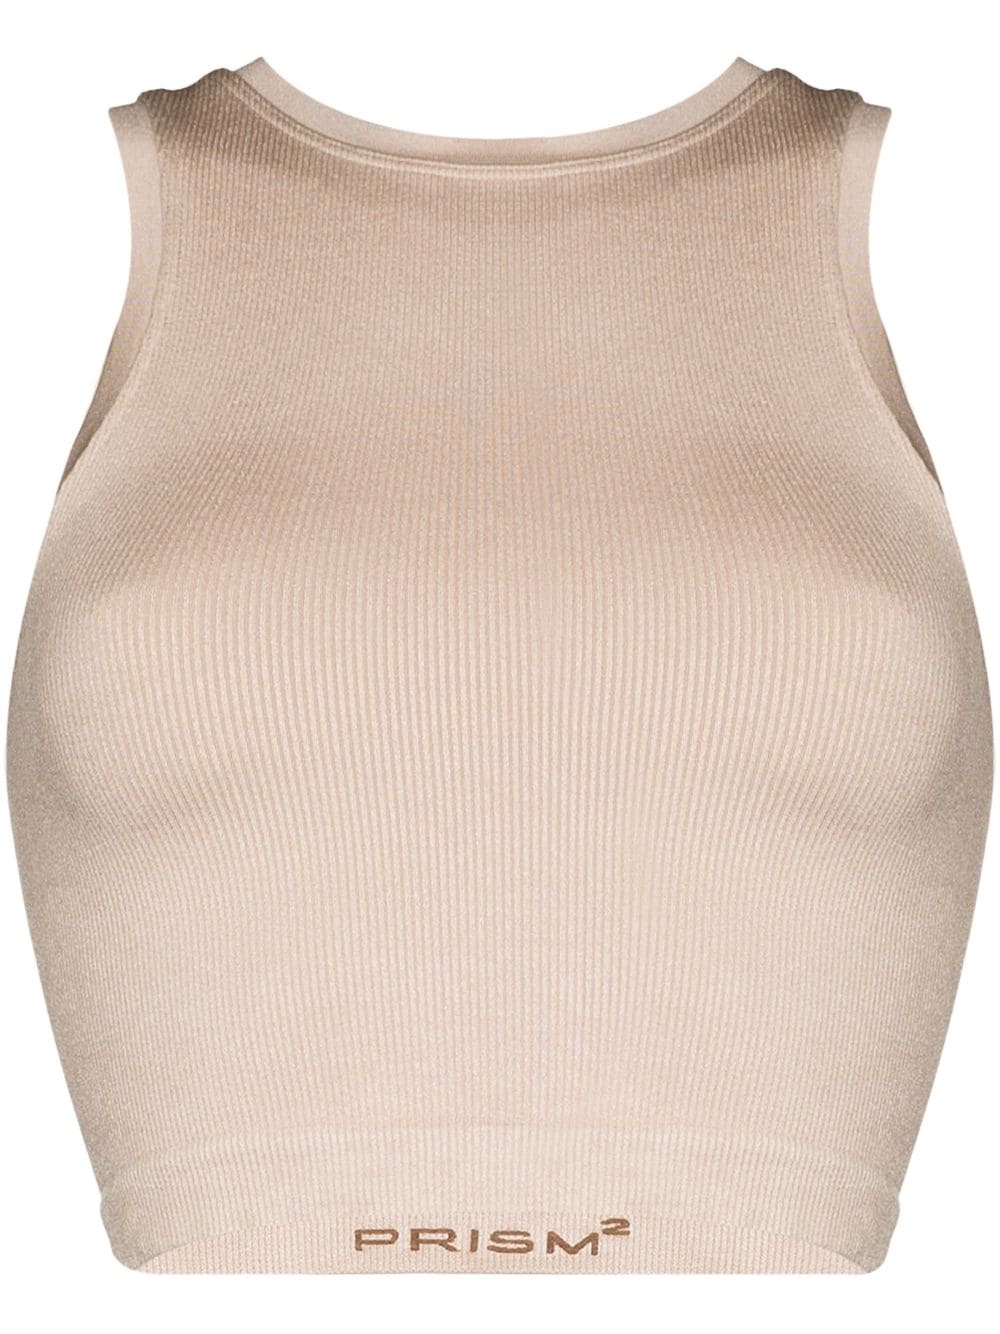 PRISM² Luminous ribbed cropped top - Neutrals